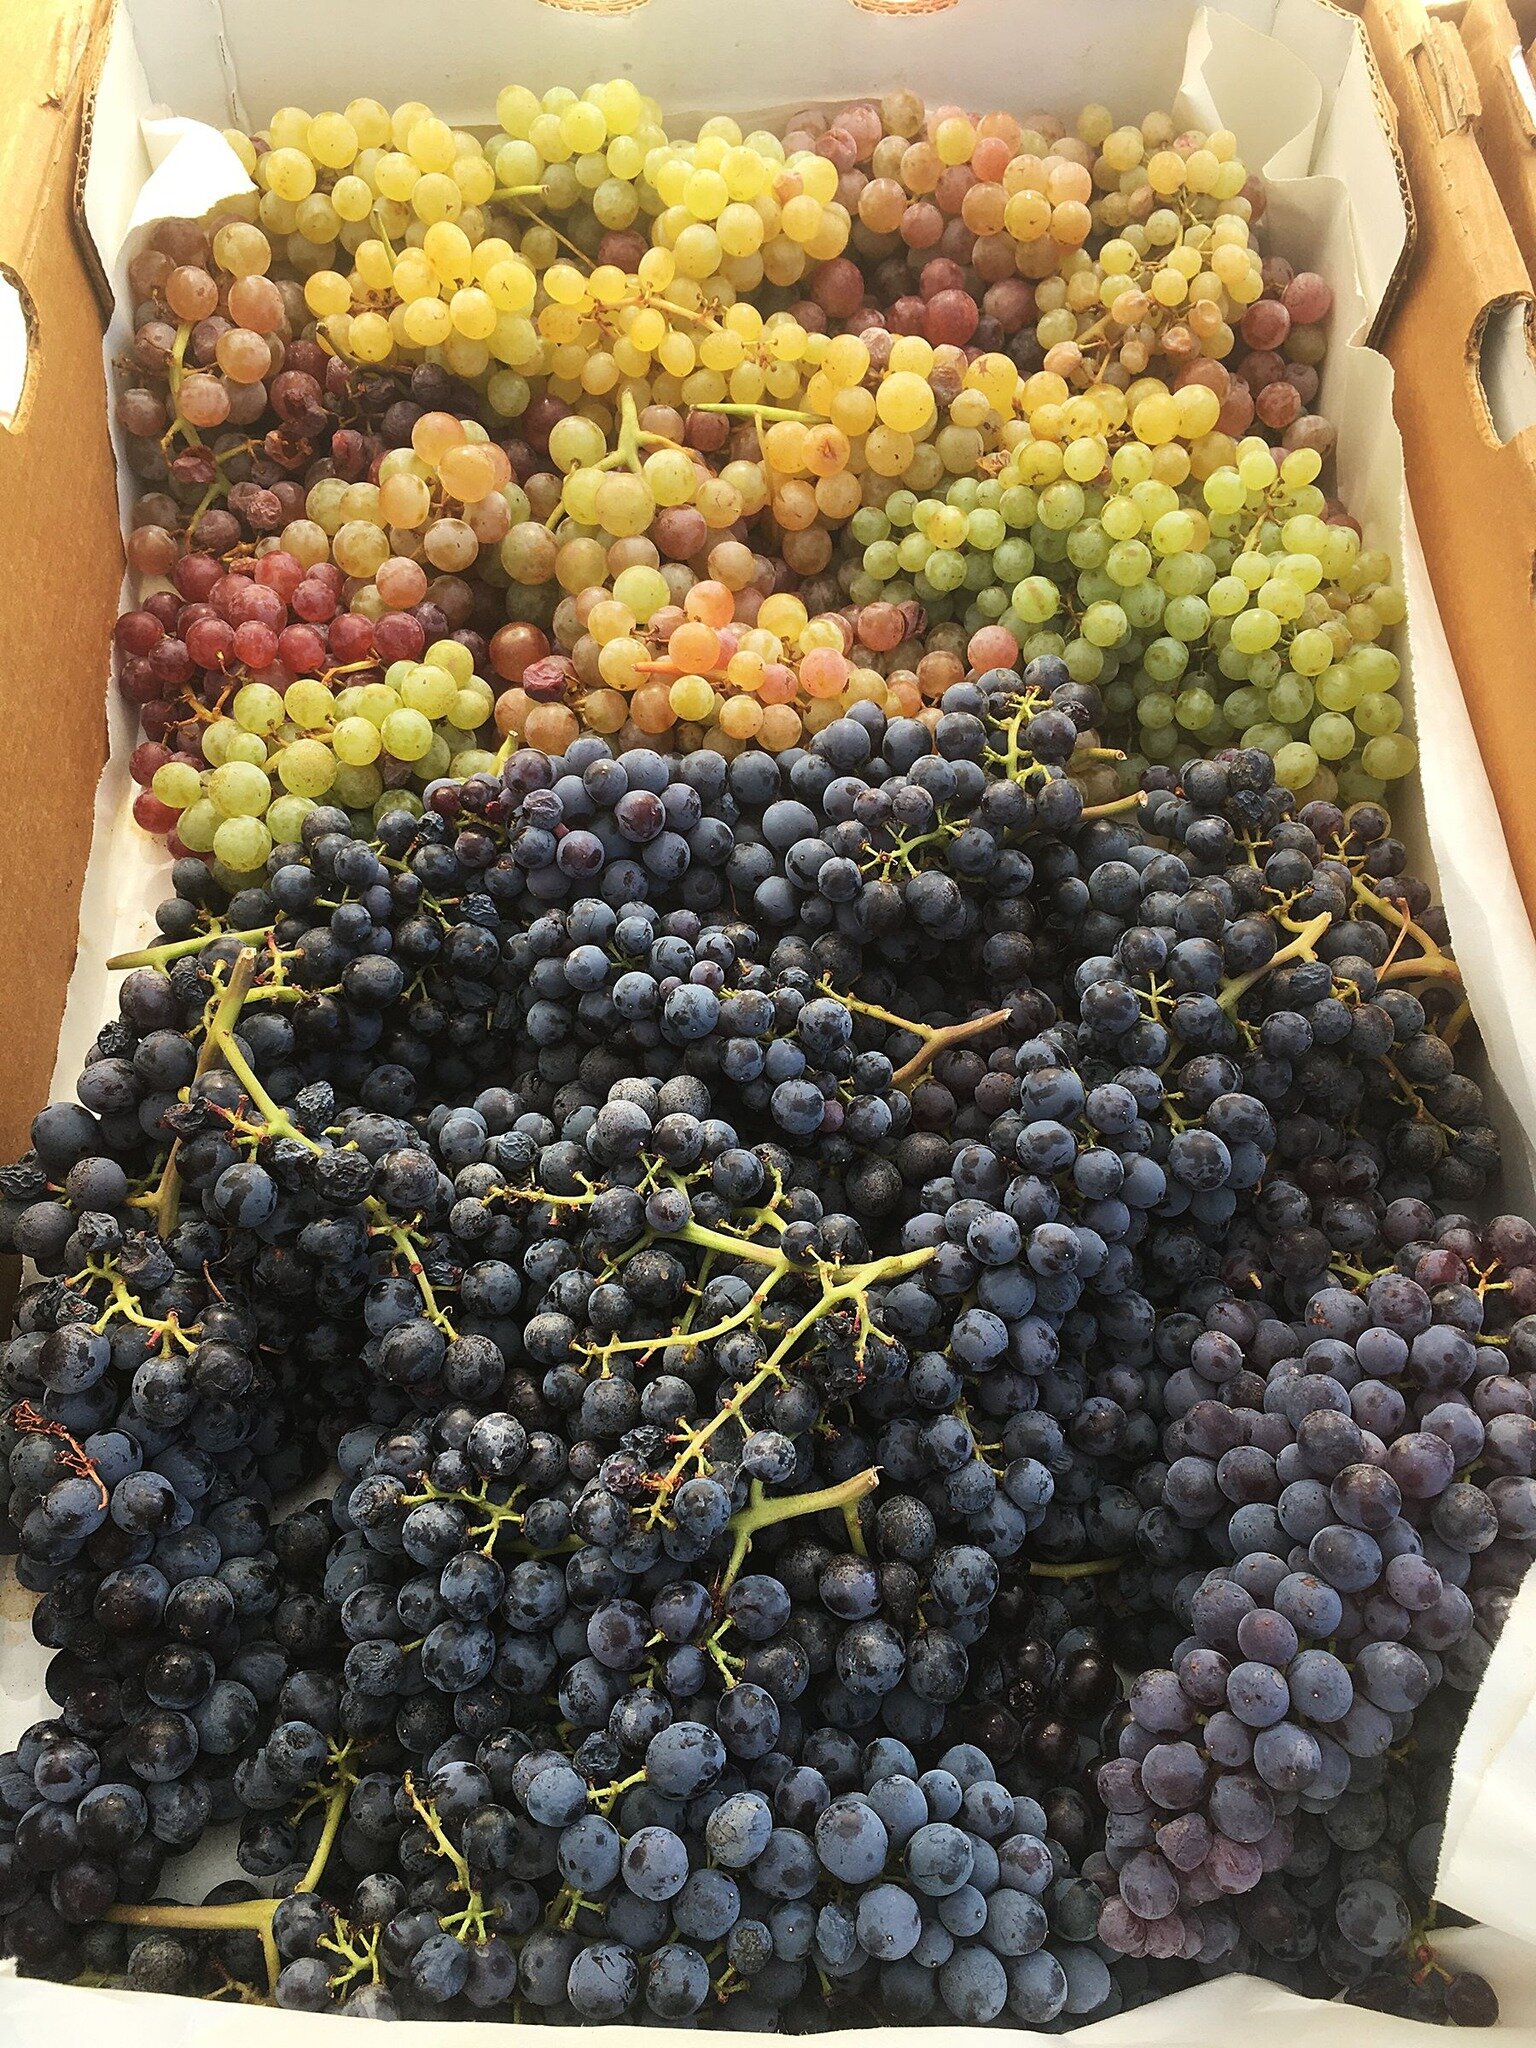 Join us on Monday for a grape time 😄🍇 at the Mount Shasta Farmers' Market in downtown Mount Shasta from 3:30- 6:00pm. 
Shop local for fresh food, enjoy live music, use your EBT and CalFresh, support local makers and the beginning of the fall season